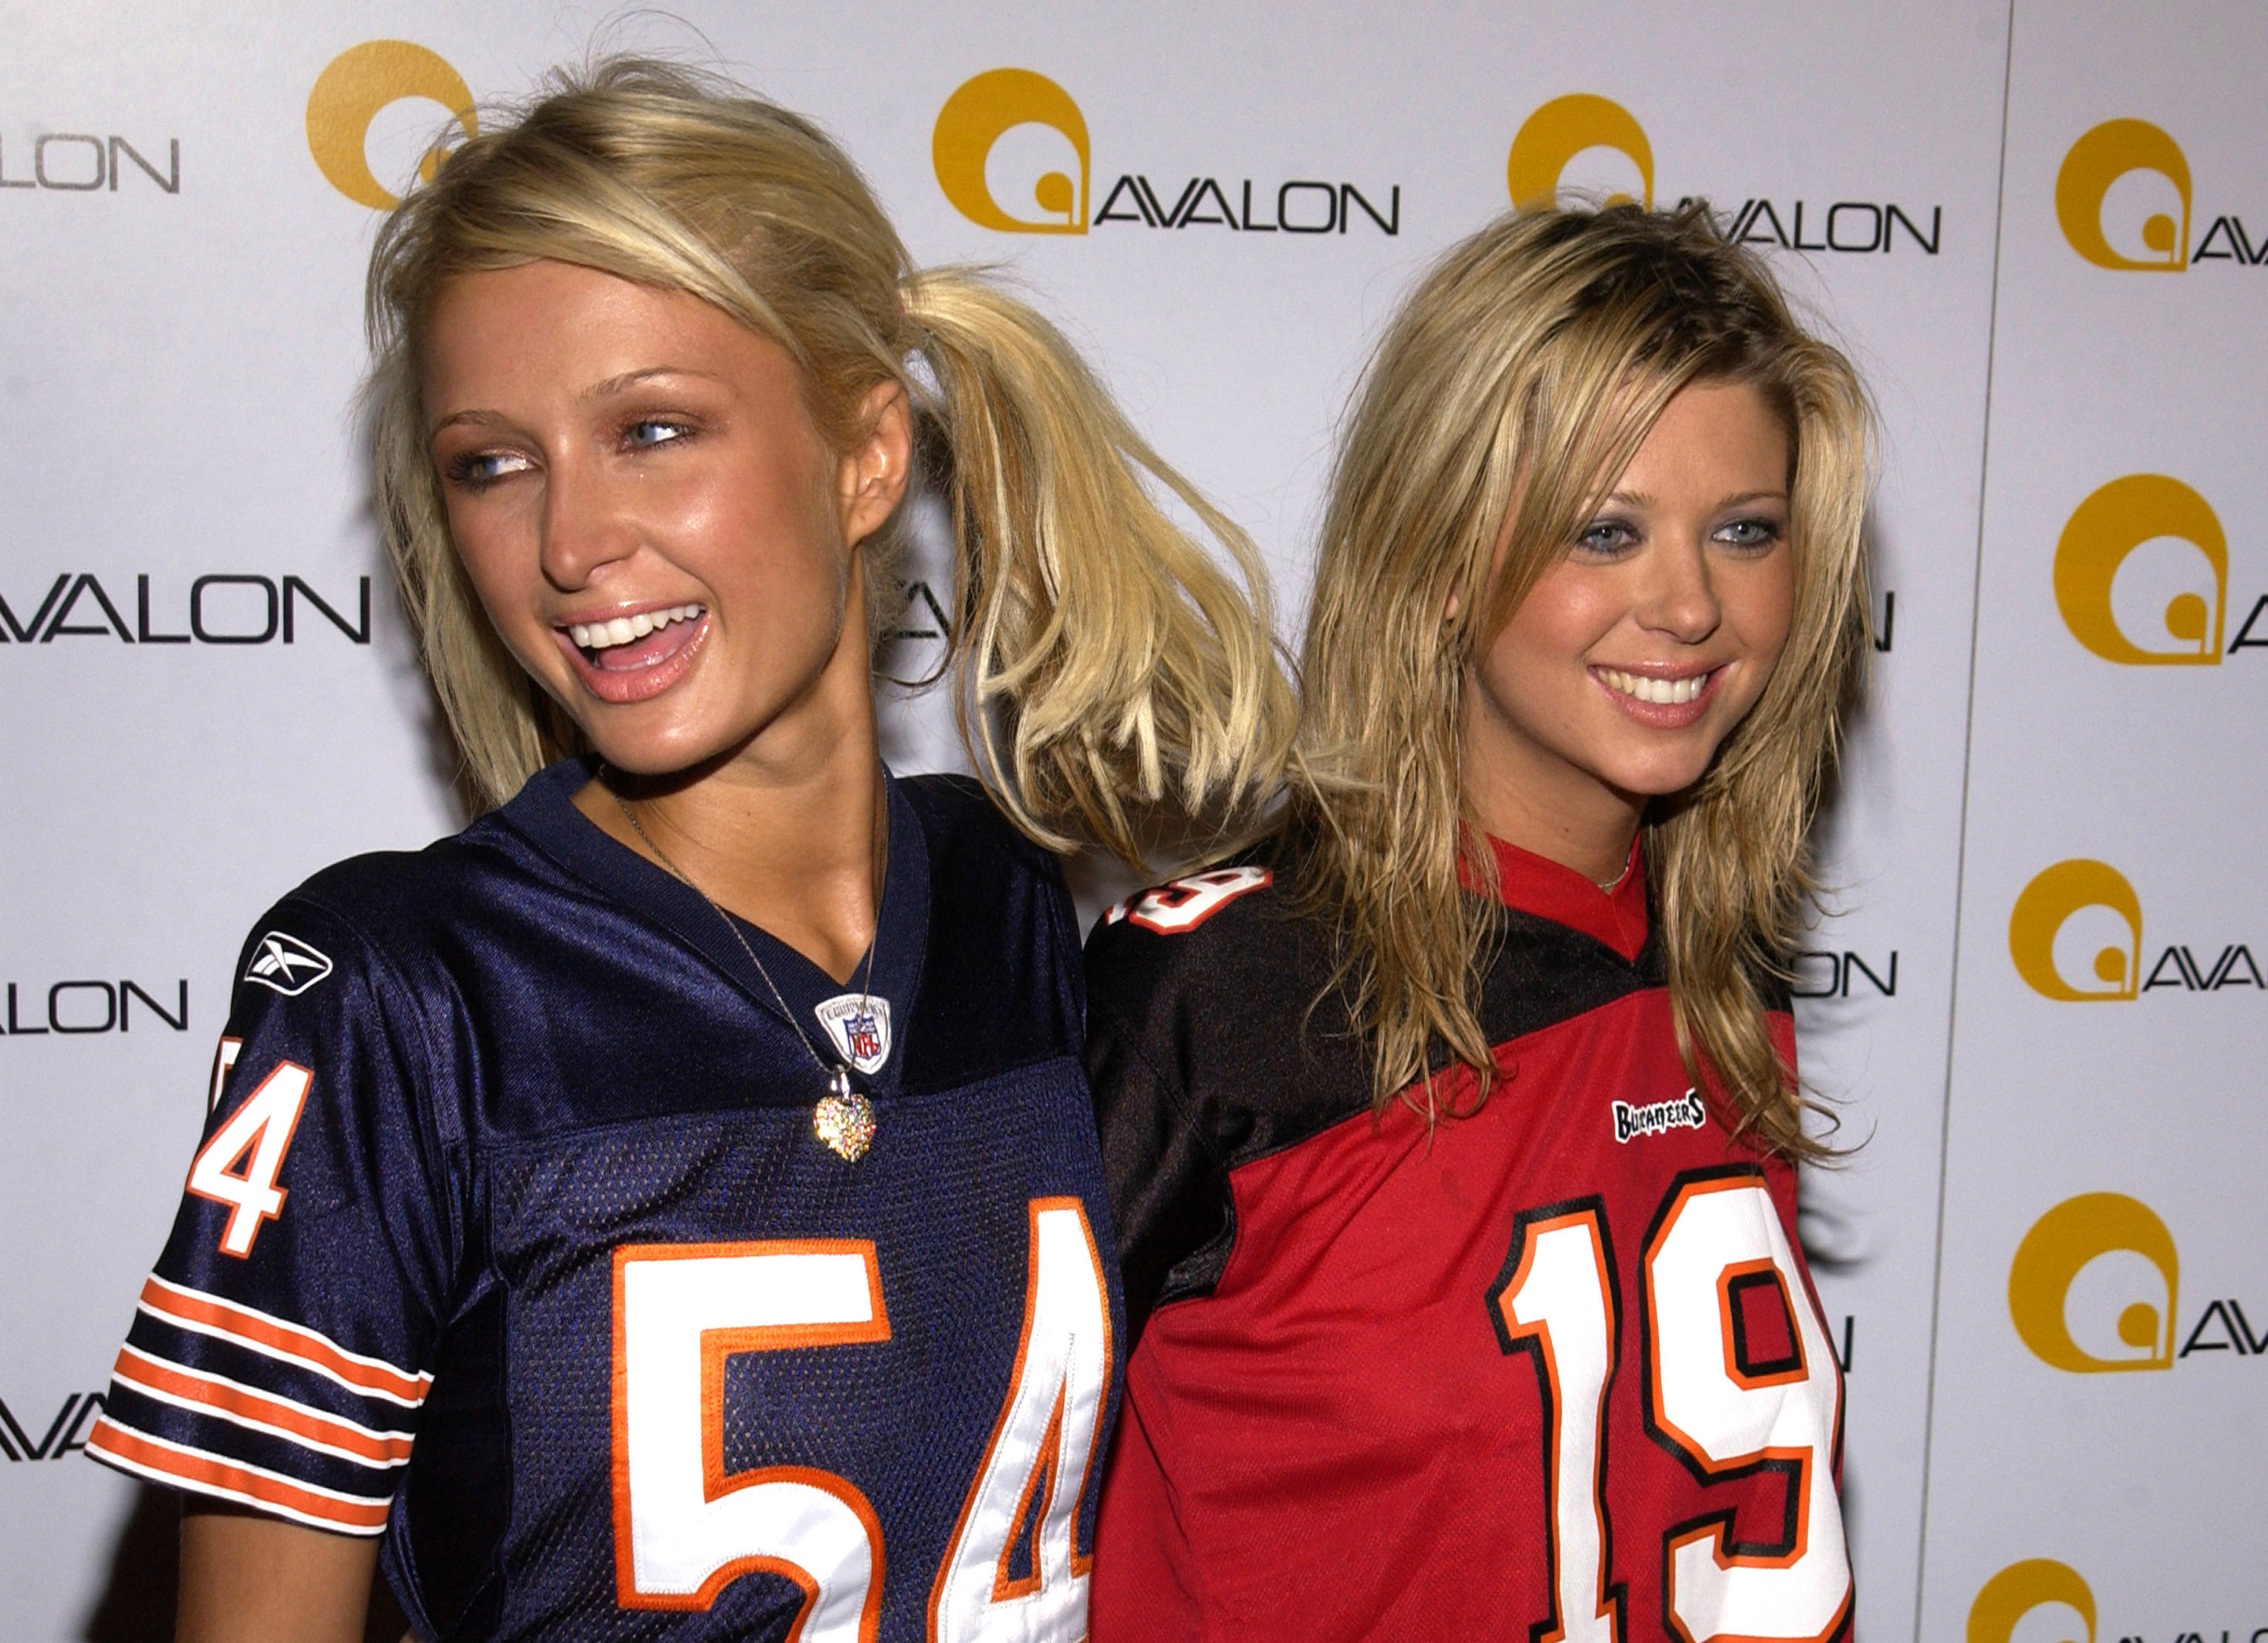 Paris Hilton and Tara Reid in football jerseys in front of a background that reads &quot;avalon&quot;